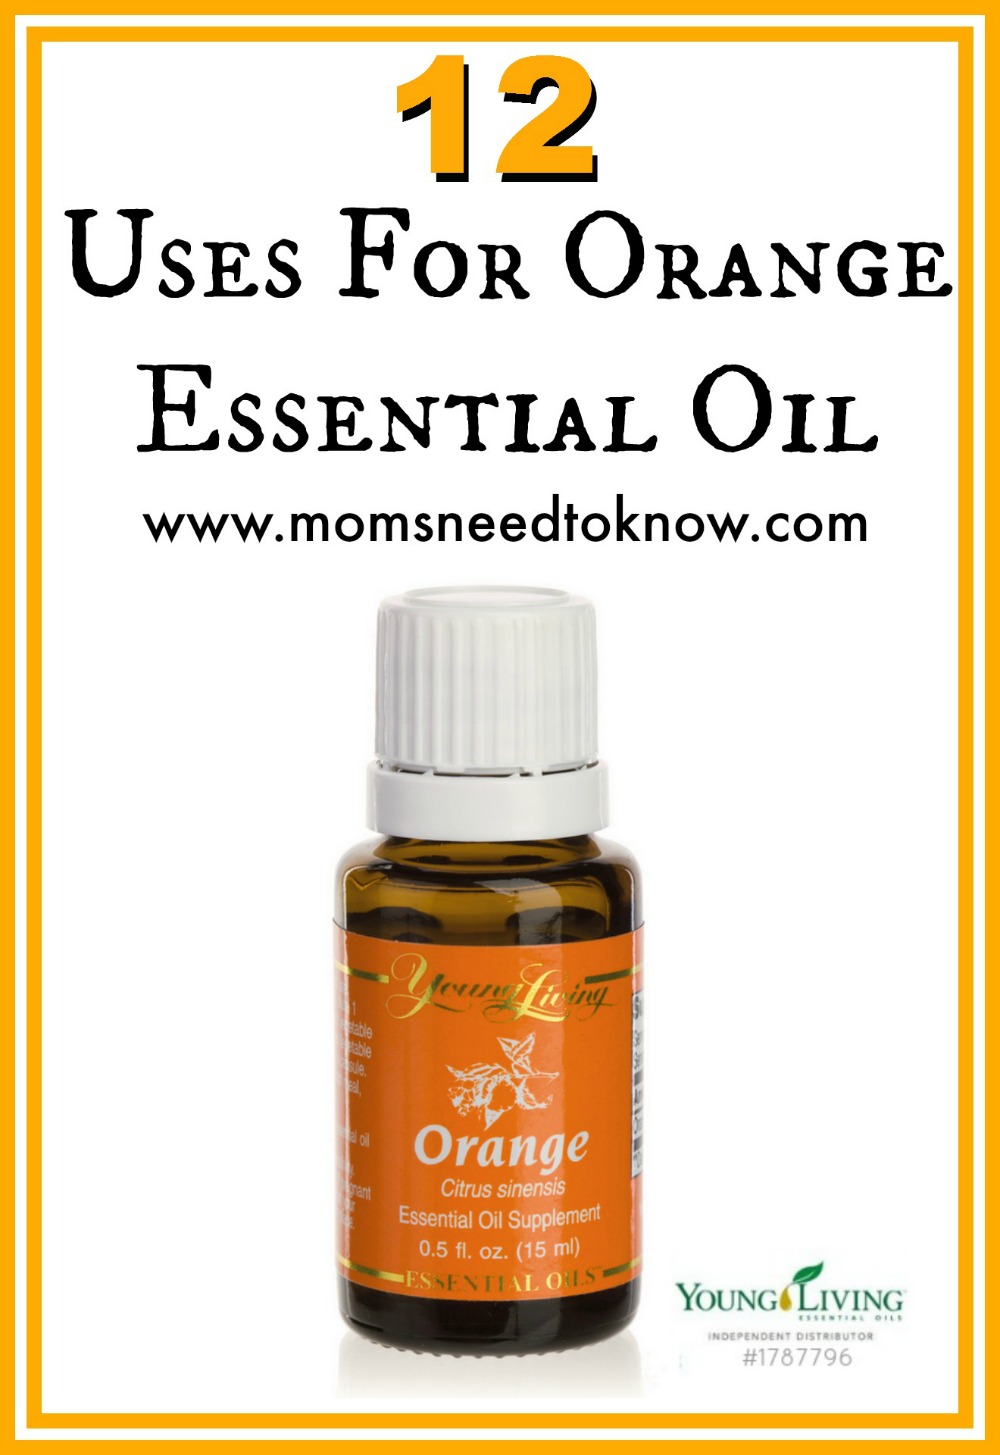 How To Use Orange Essential Oils - 12 Uses